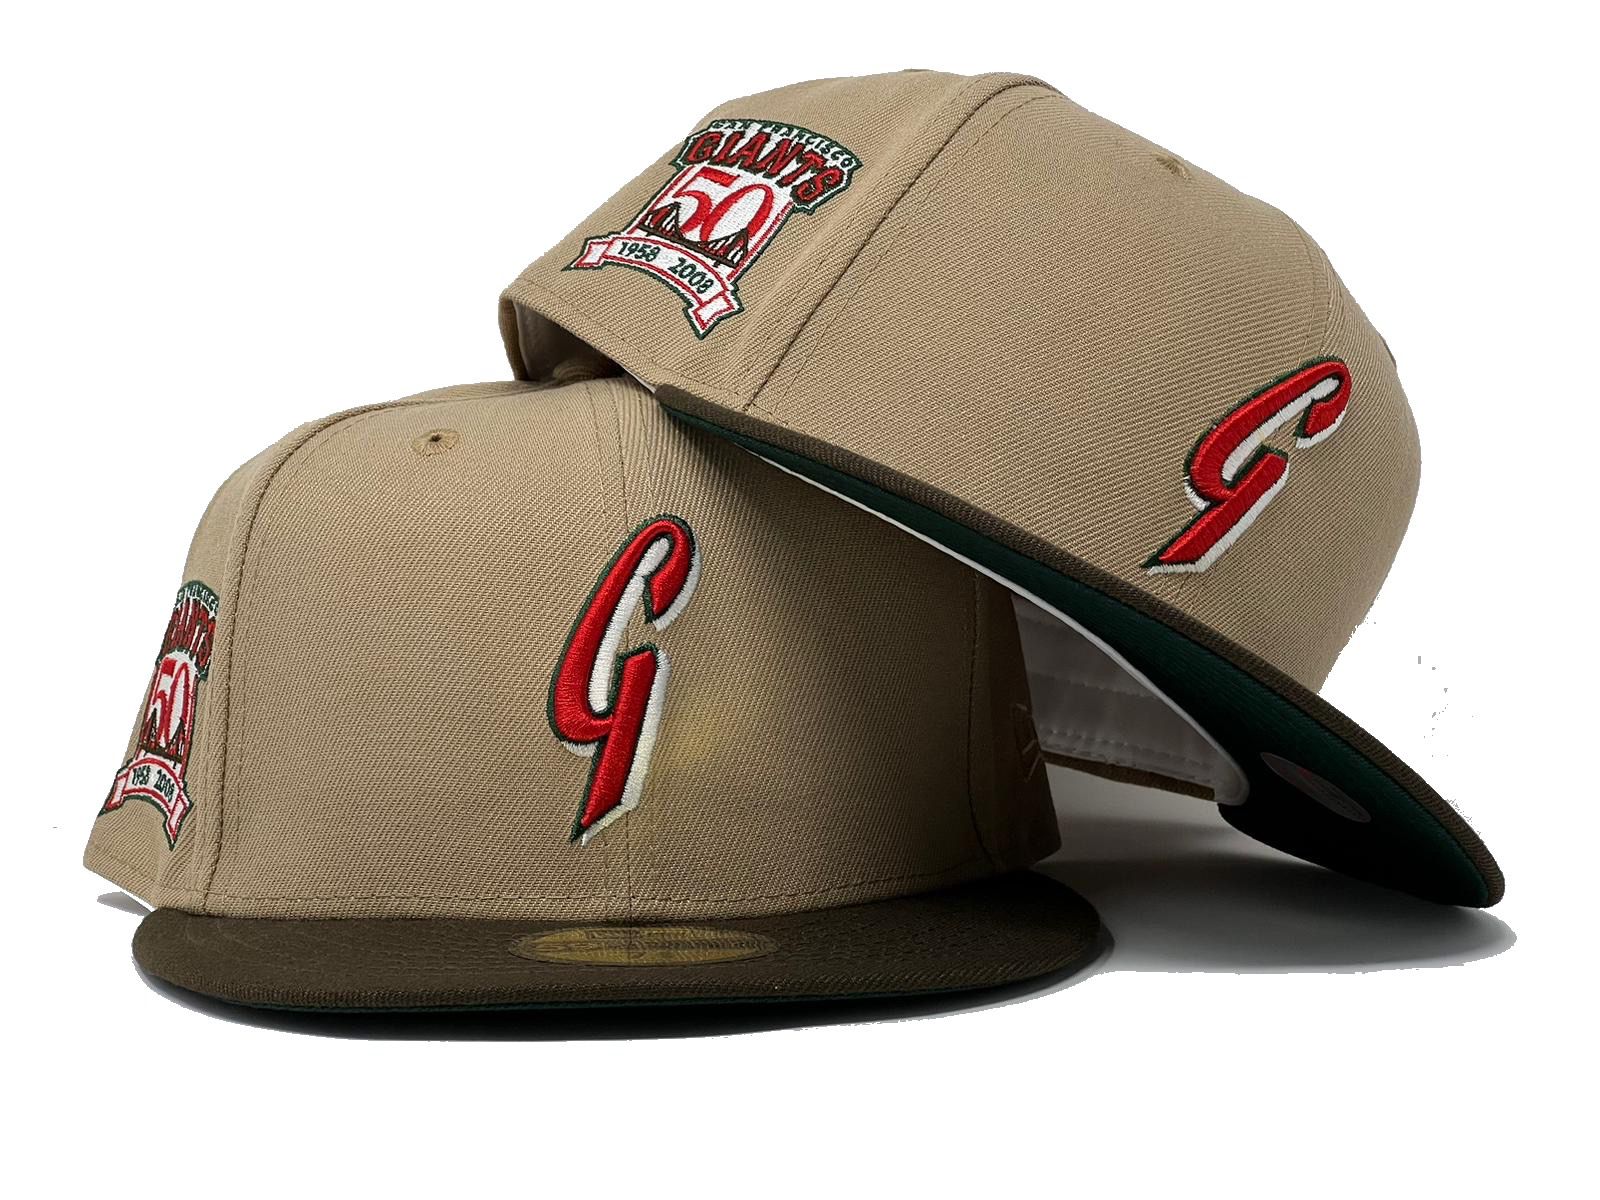 New Era 59FIFTY San Francisco Giants Fitted Hat Dark Green White